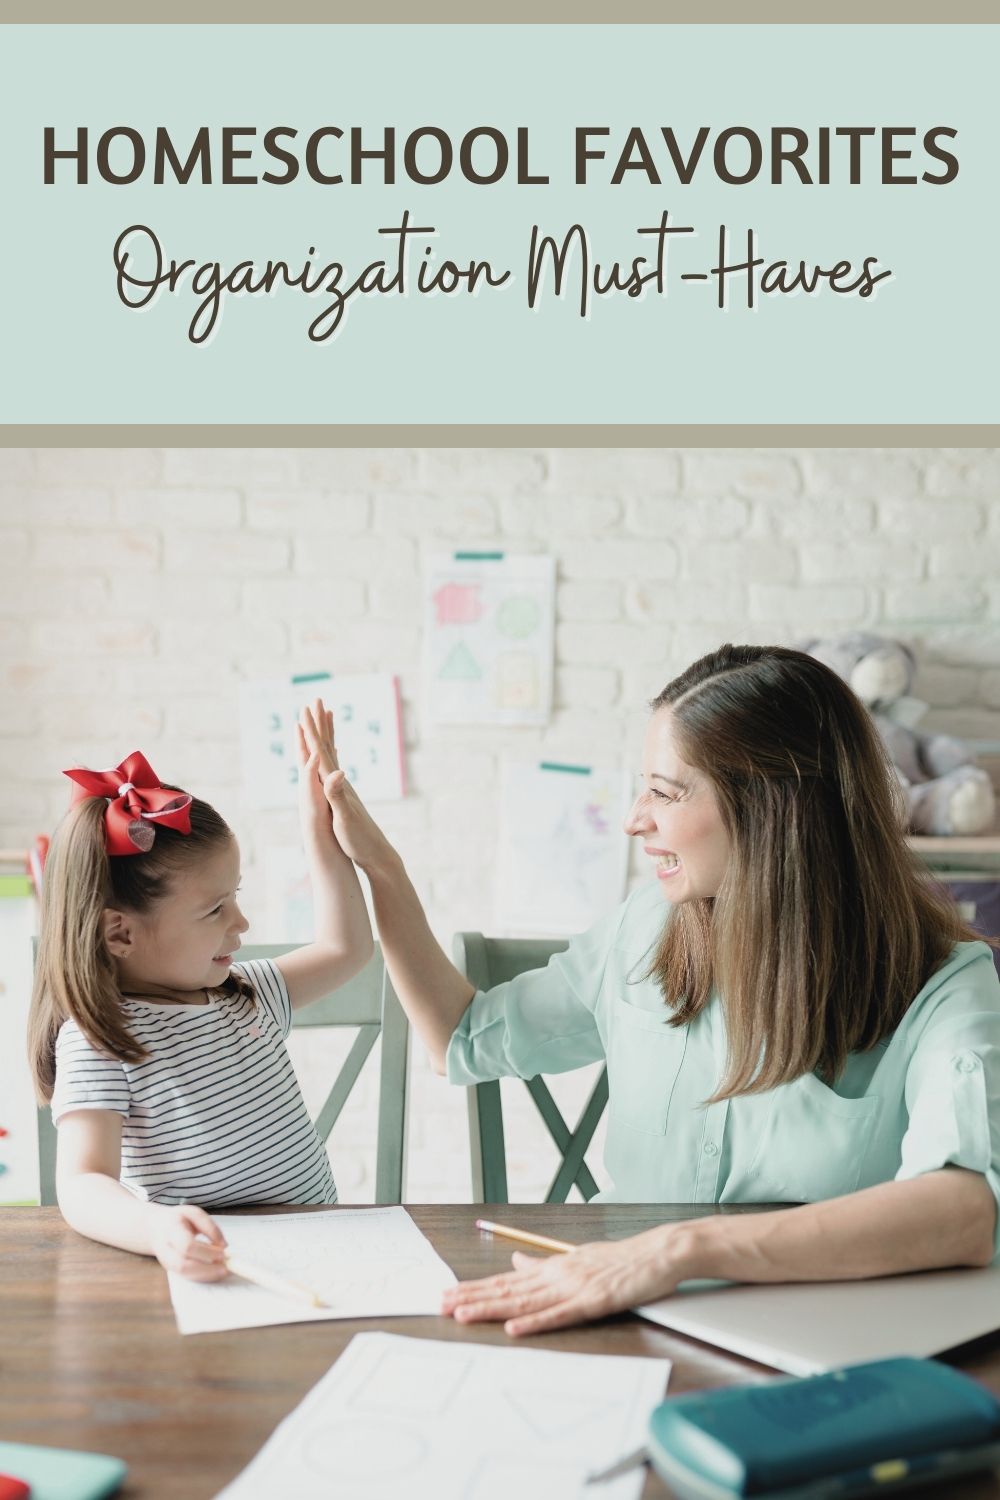 As more families opt for homeschooling their children, I thought it would be a good time to share some of the things I feel are essential for organization.